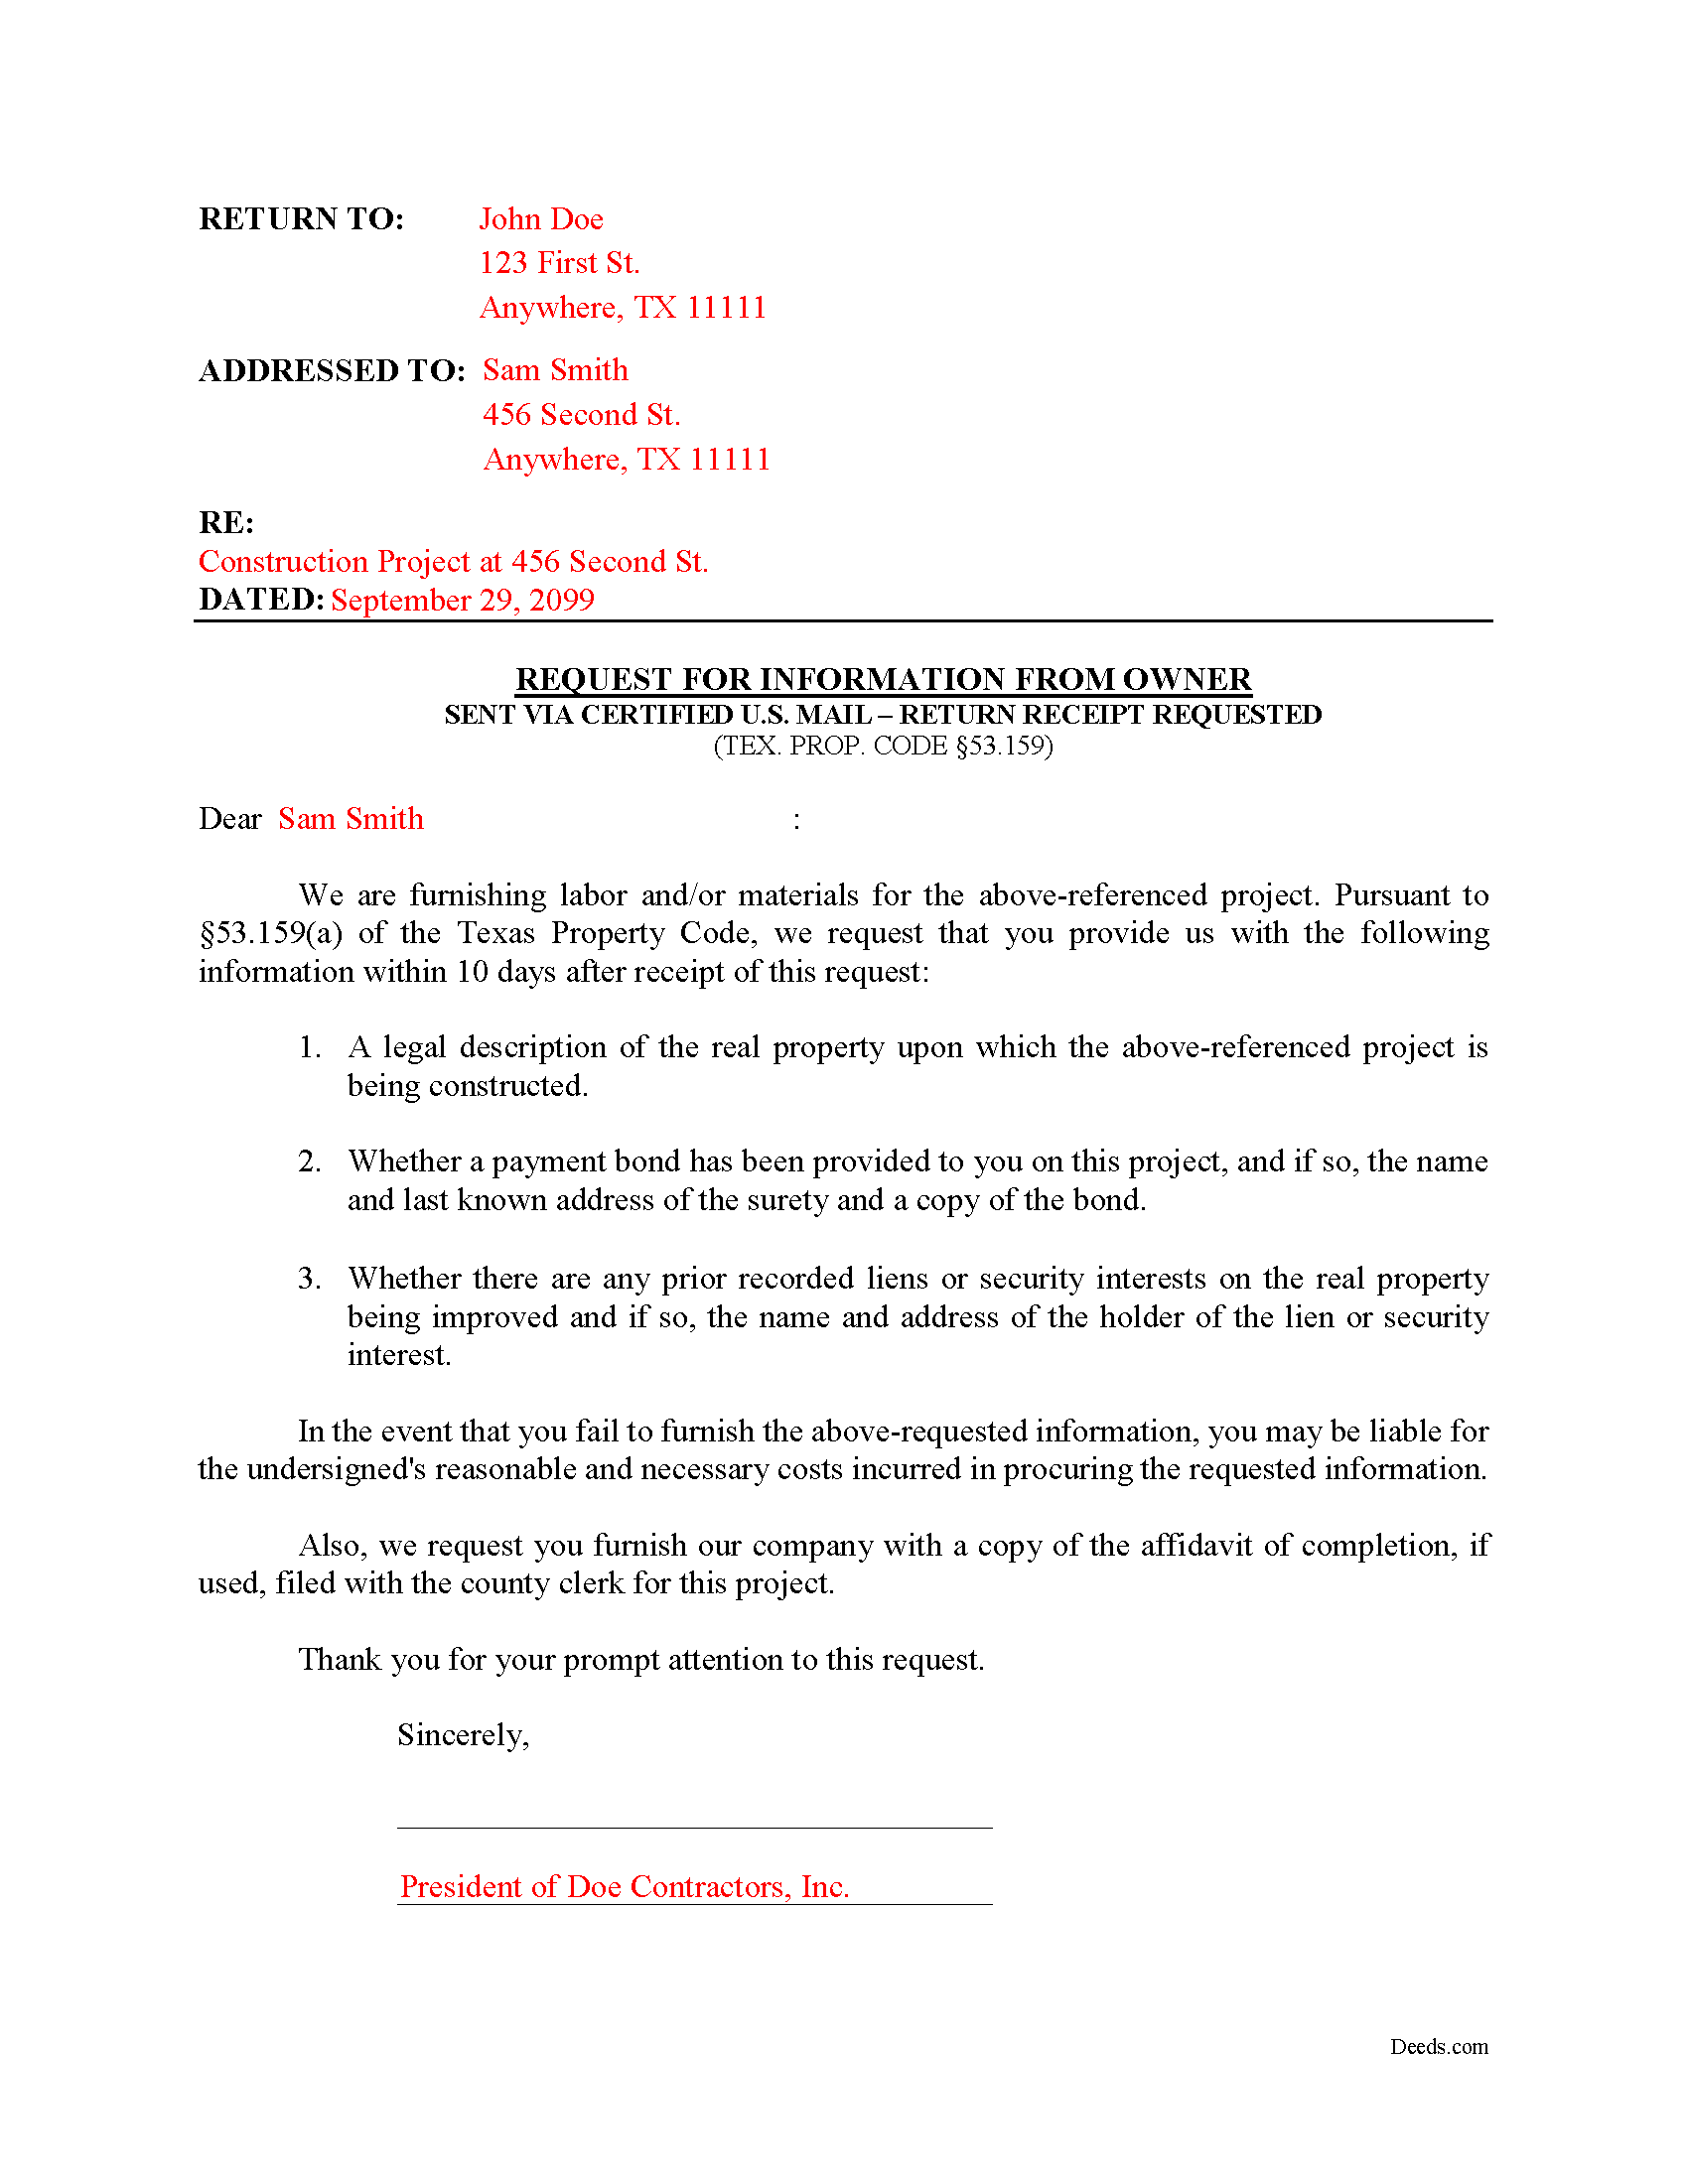 Completed Example of the Request for Information from Owner Document